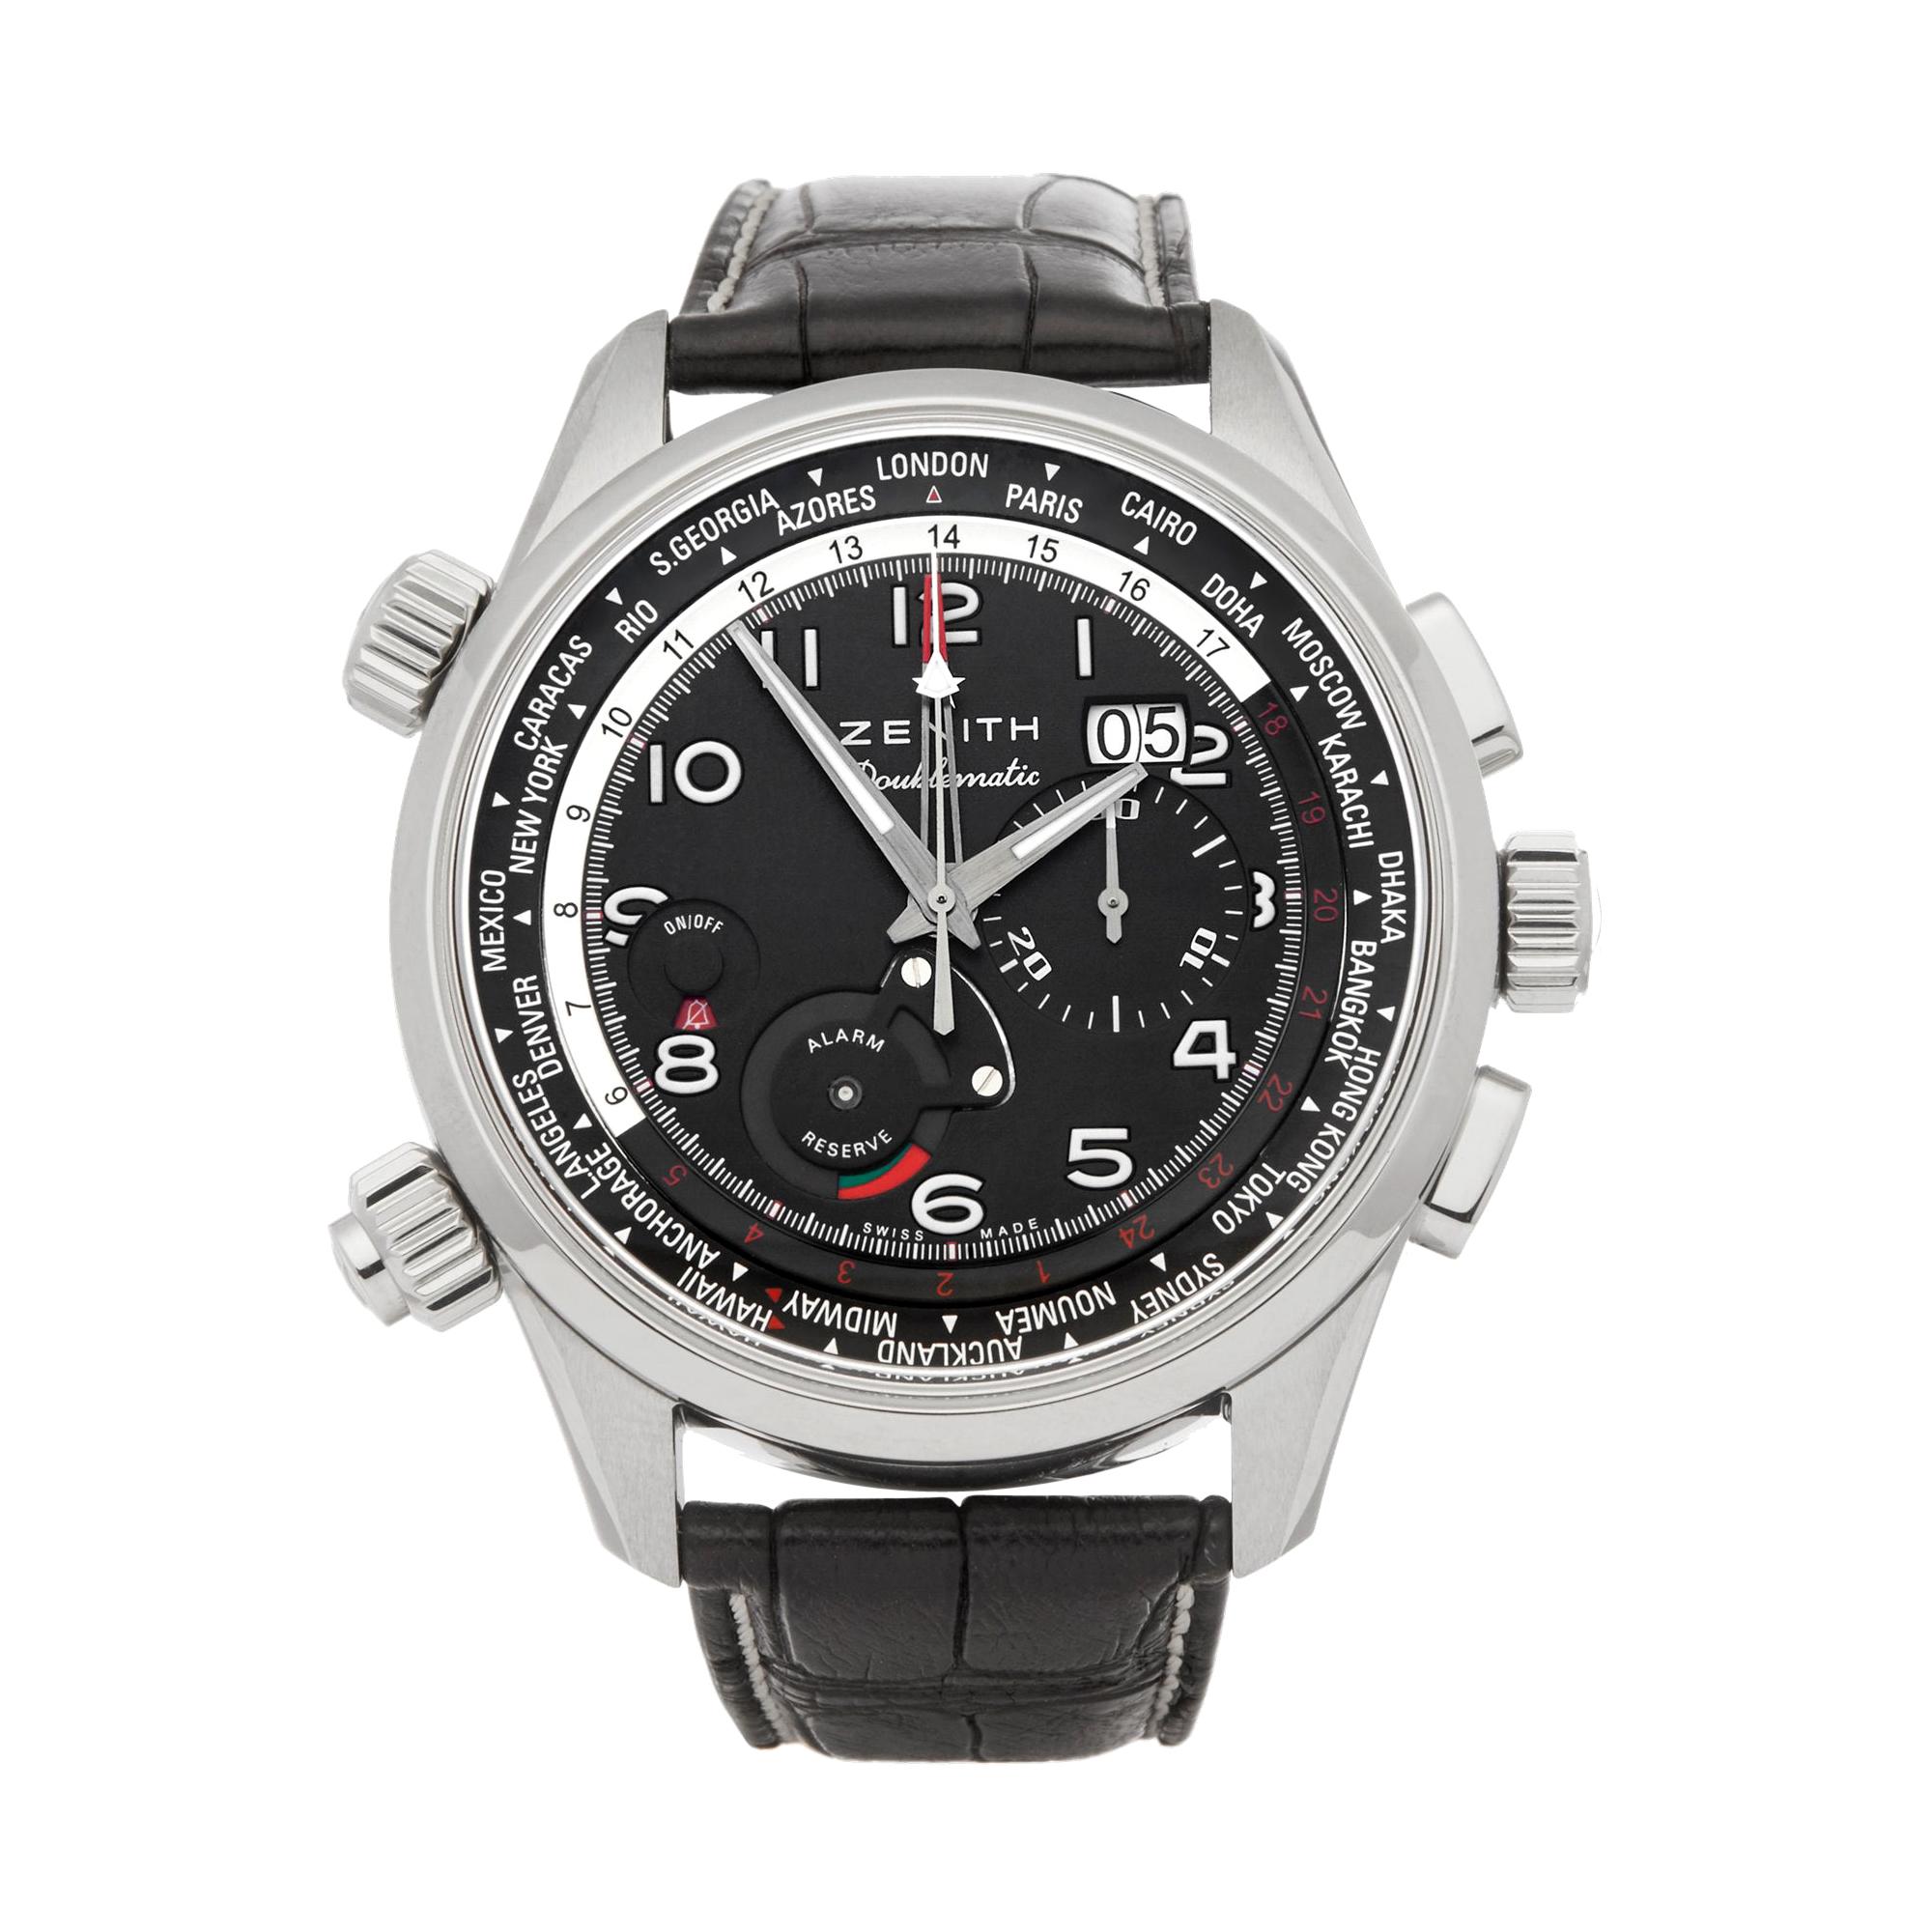 Zenith Doublematic Chronograph Stainless Steel 03.2400.4046/21.C721